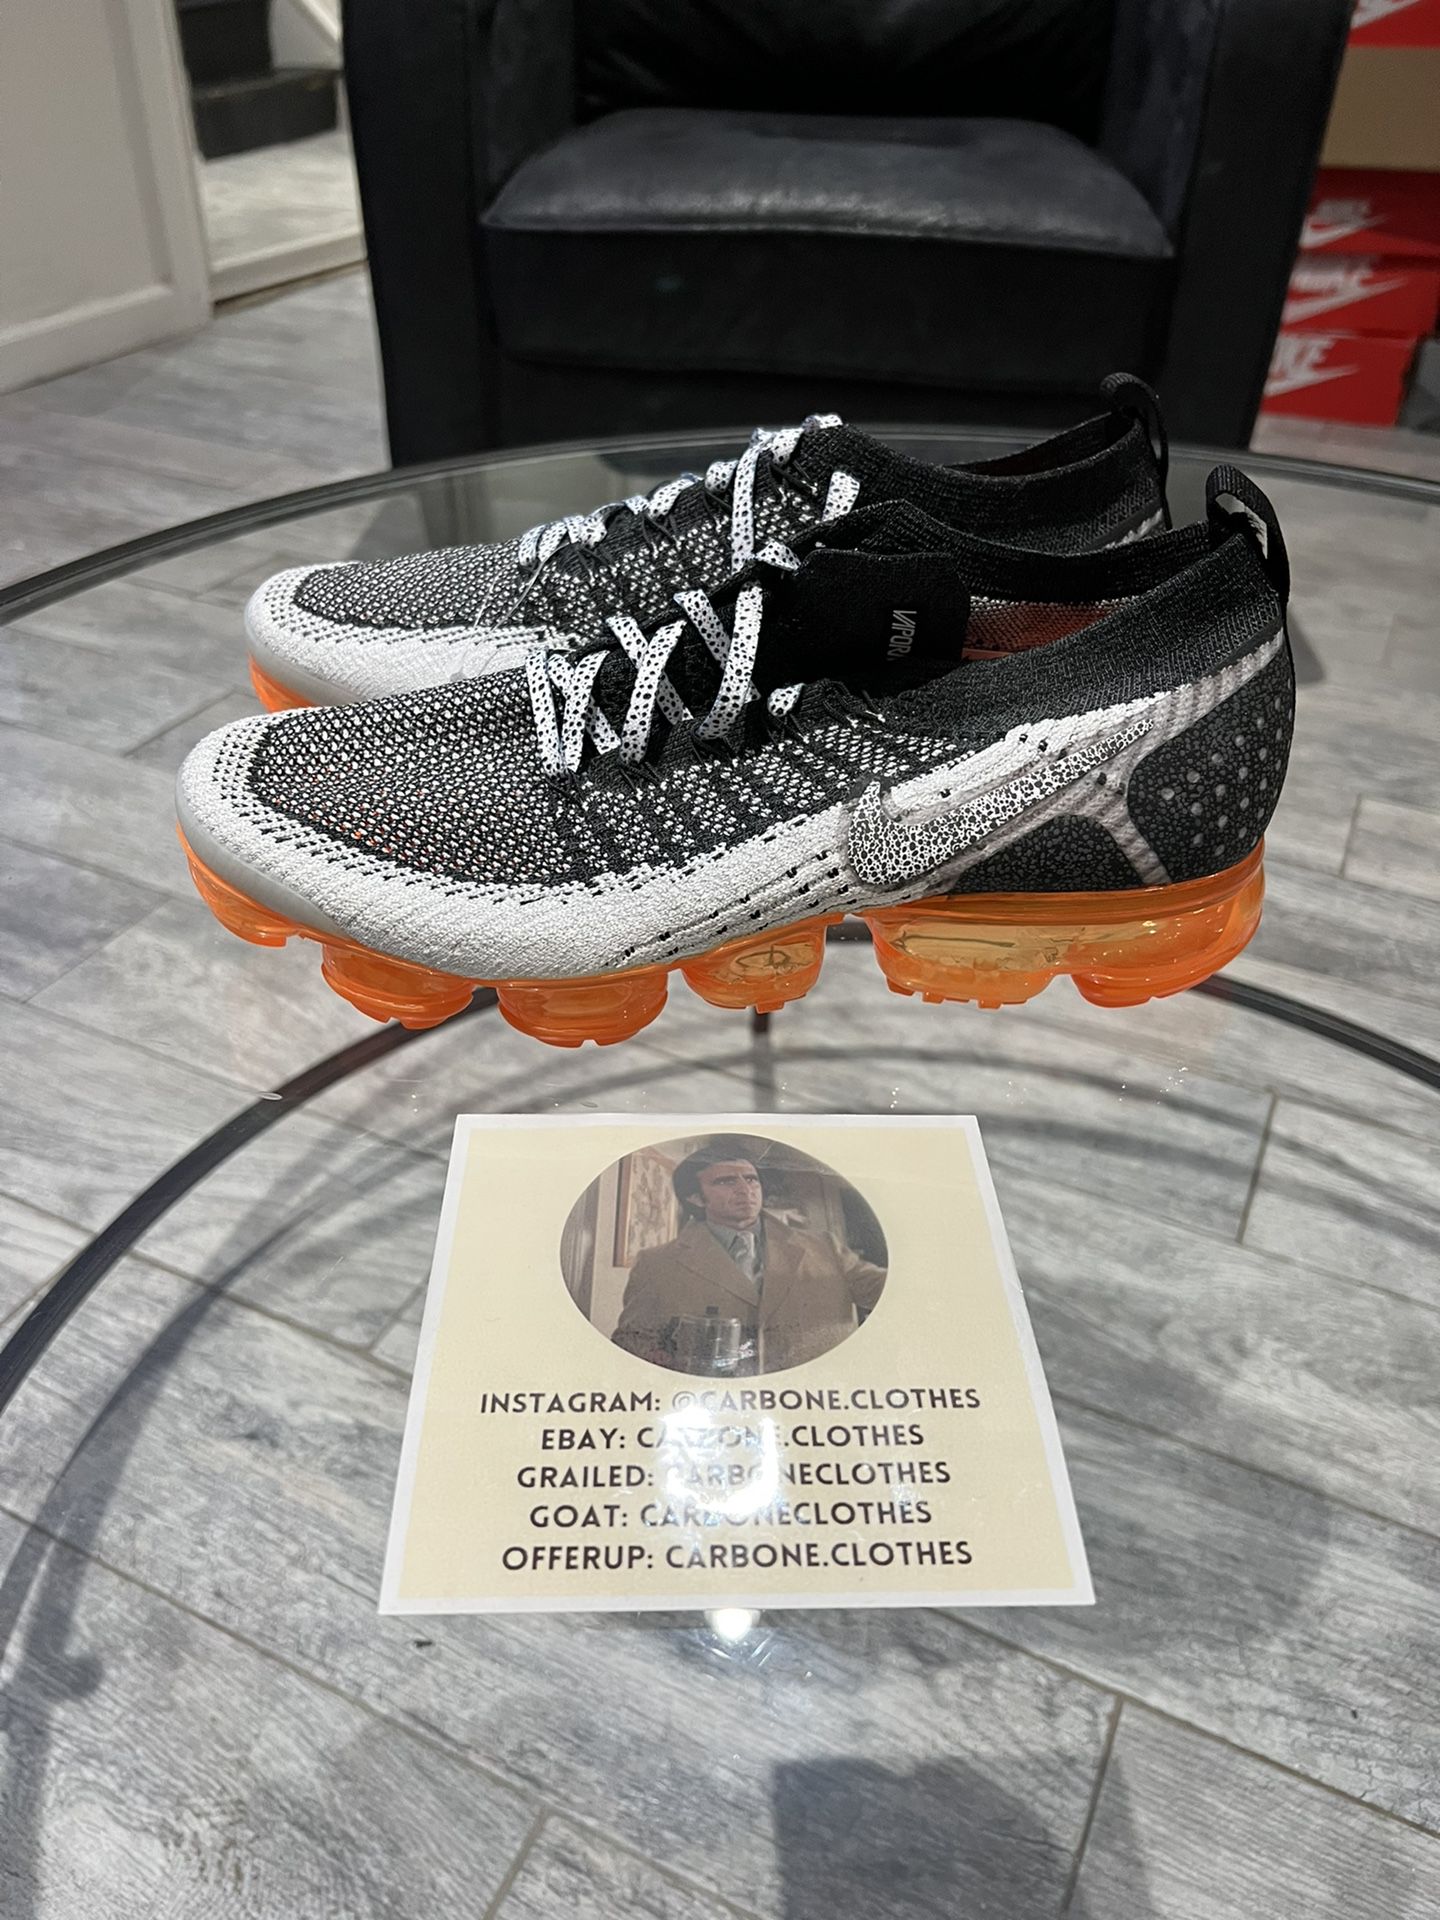 NEW NIKE AIR VAPORMAX FLYKNIT 2 SAFARI for Sale in New York, NY - OfferUp